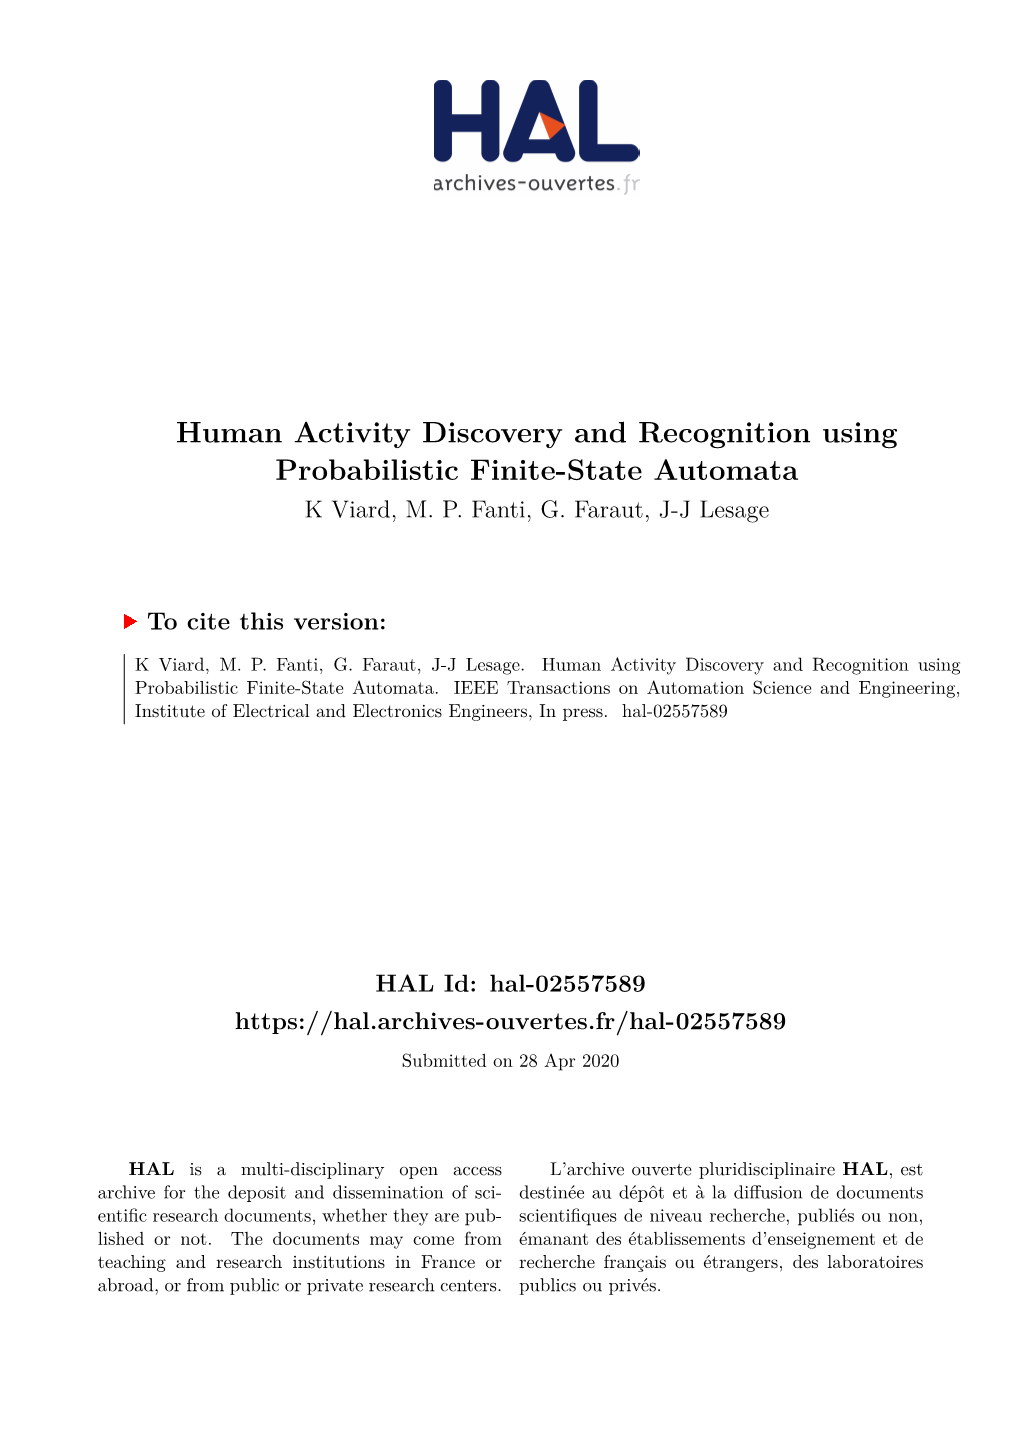 Human Activity Discovery and Recognition Using Probabilistic Finite-State Automata K Viard, M